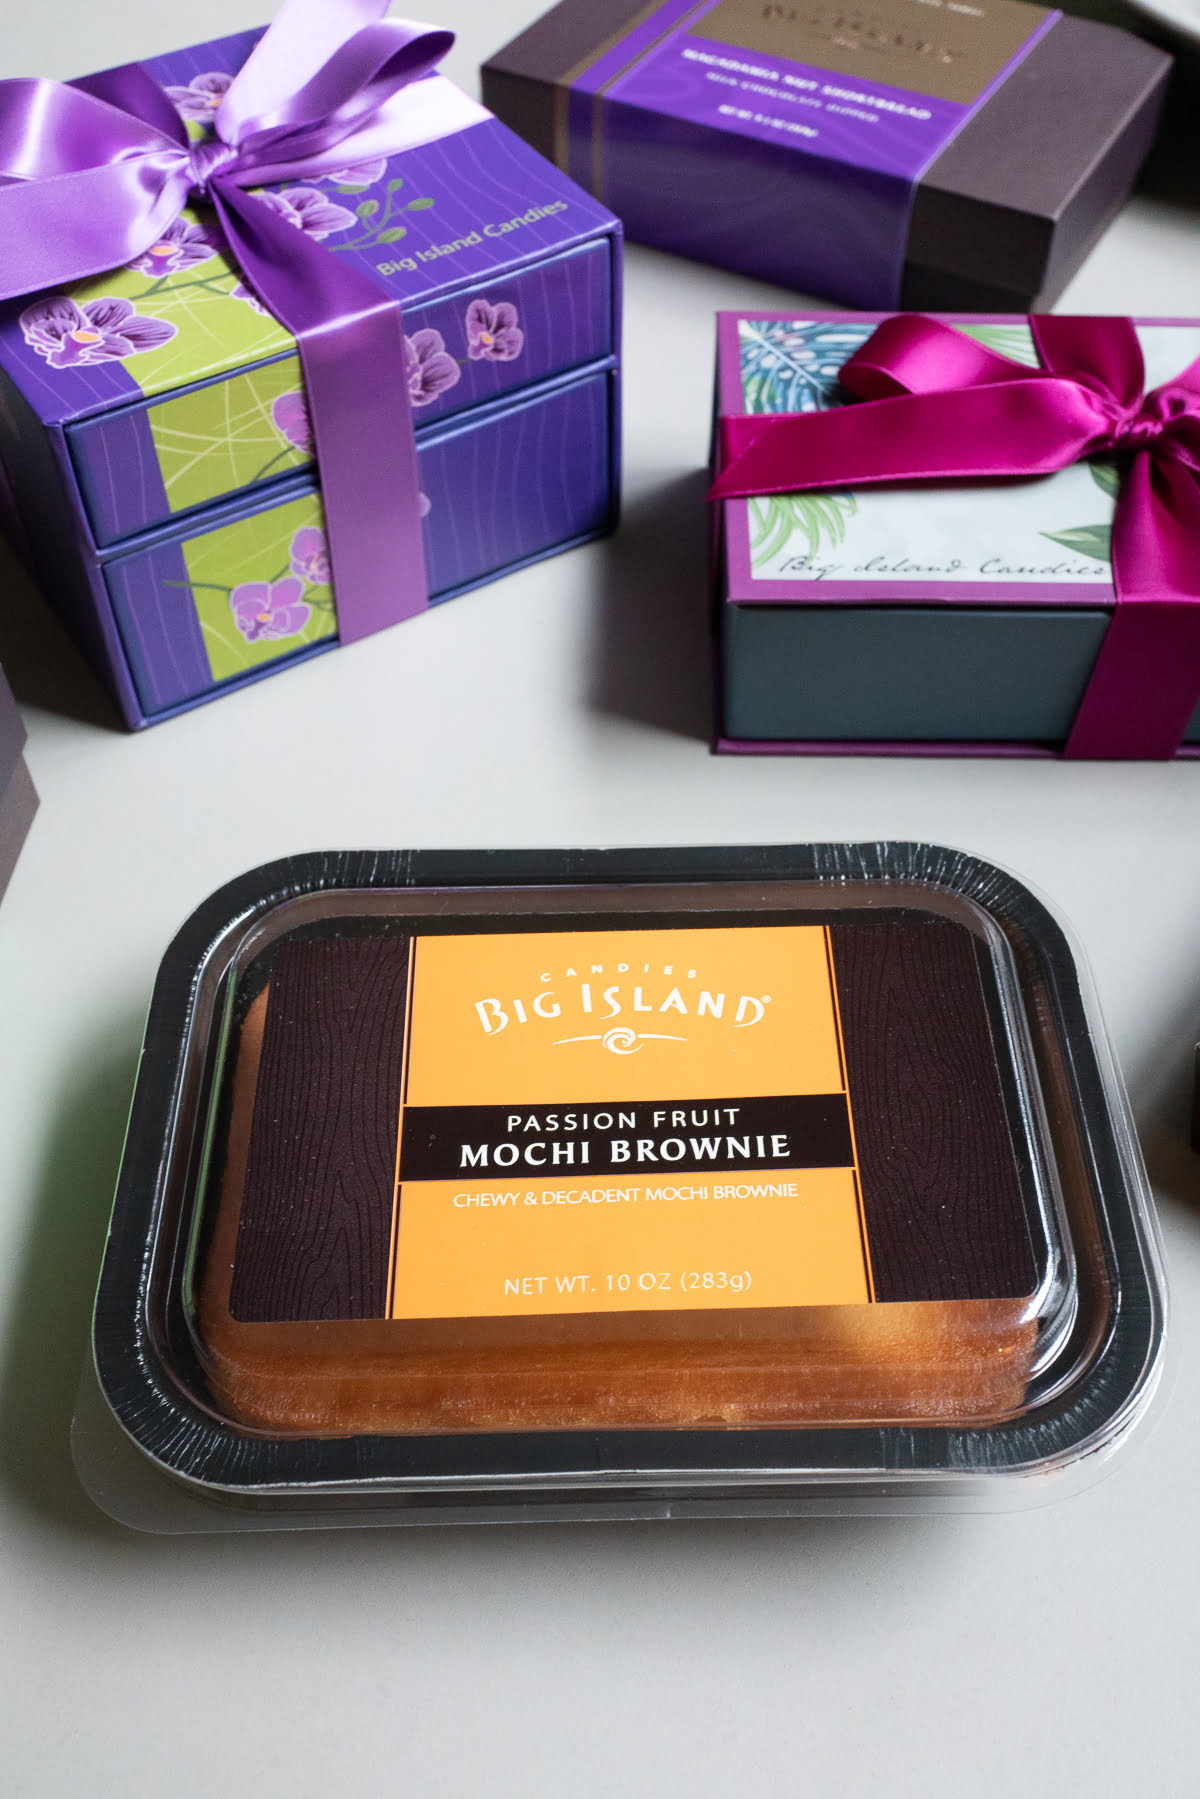 Passion Fruit Mochi Brownies from Big Island Candies.